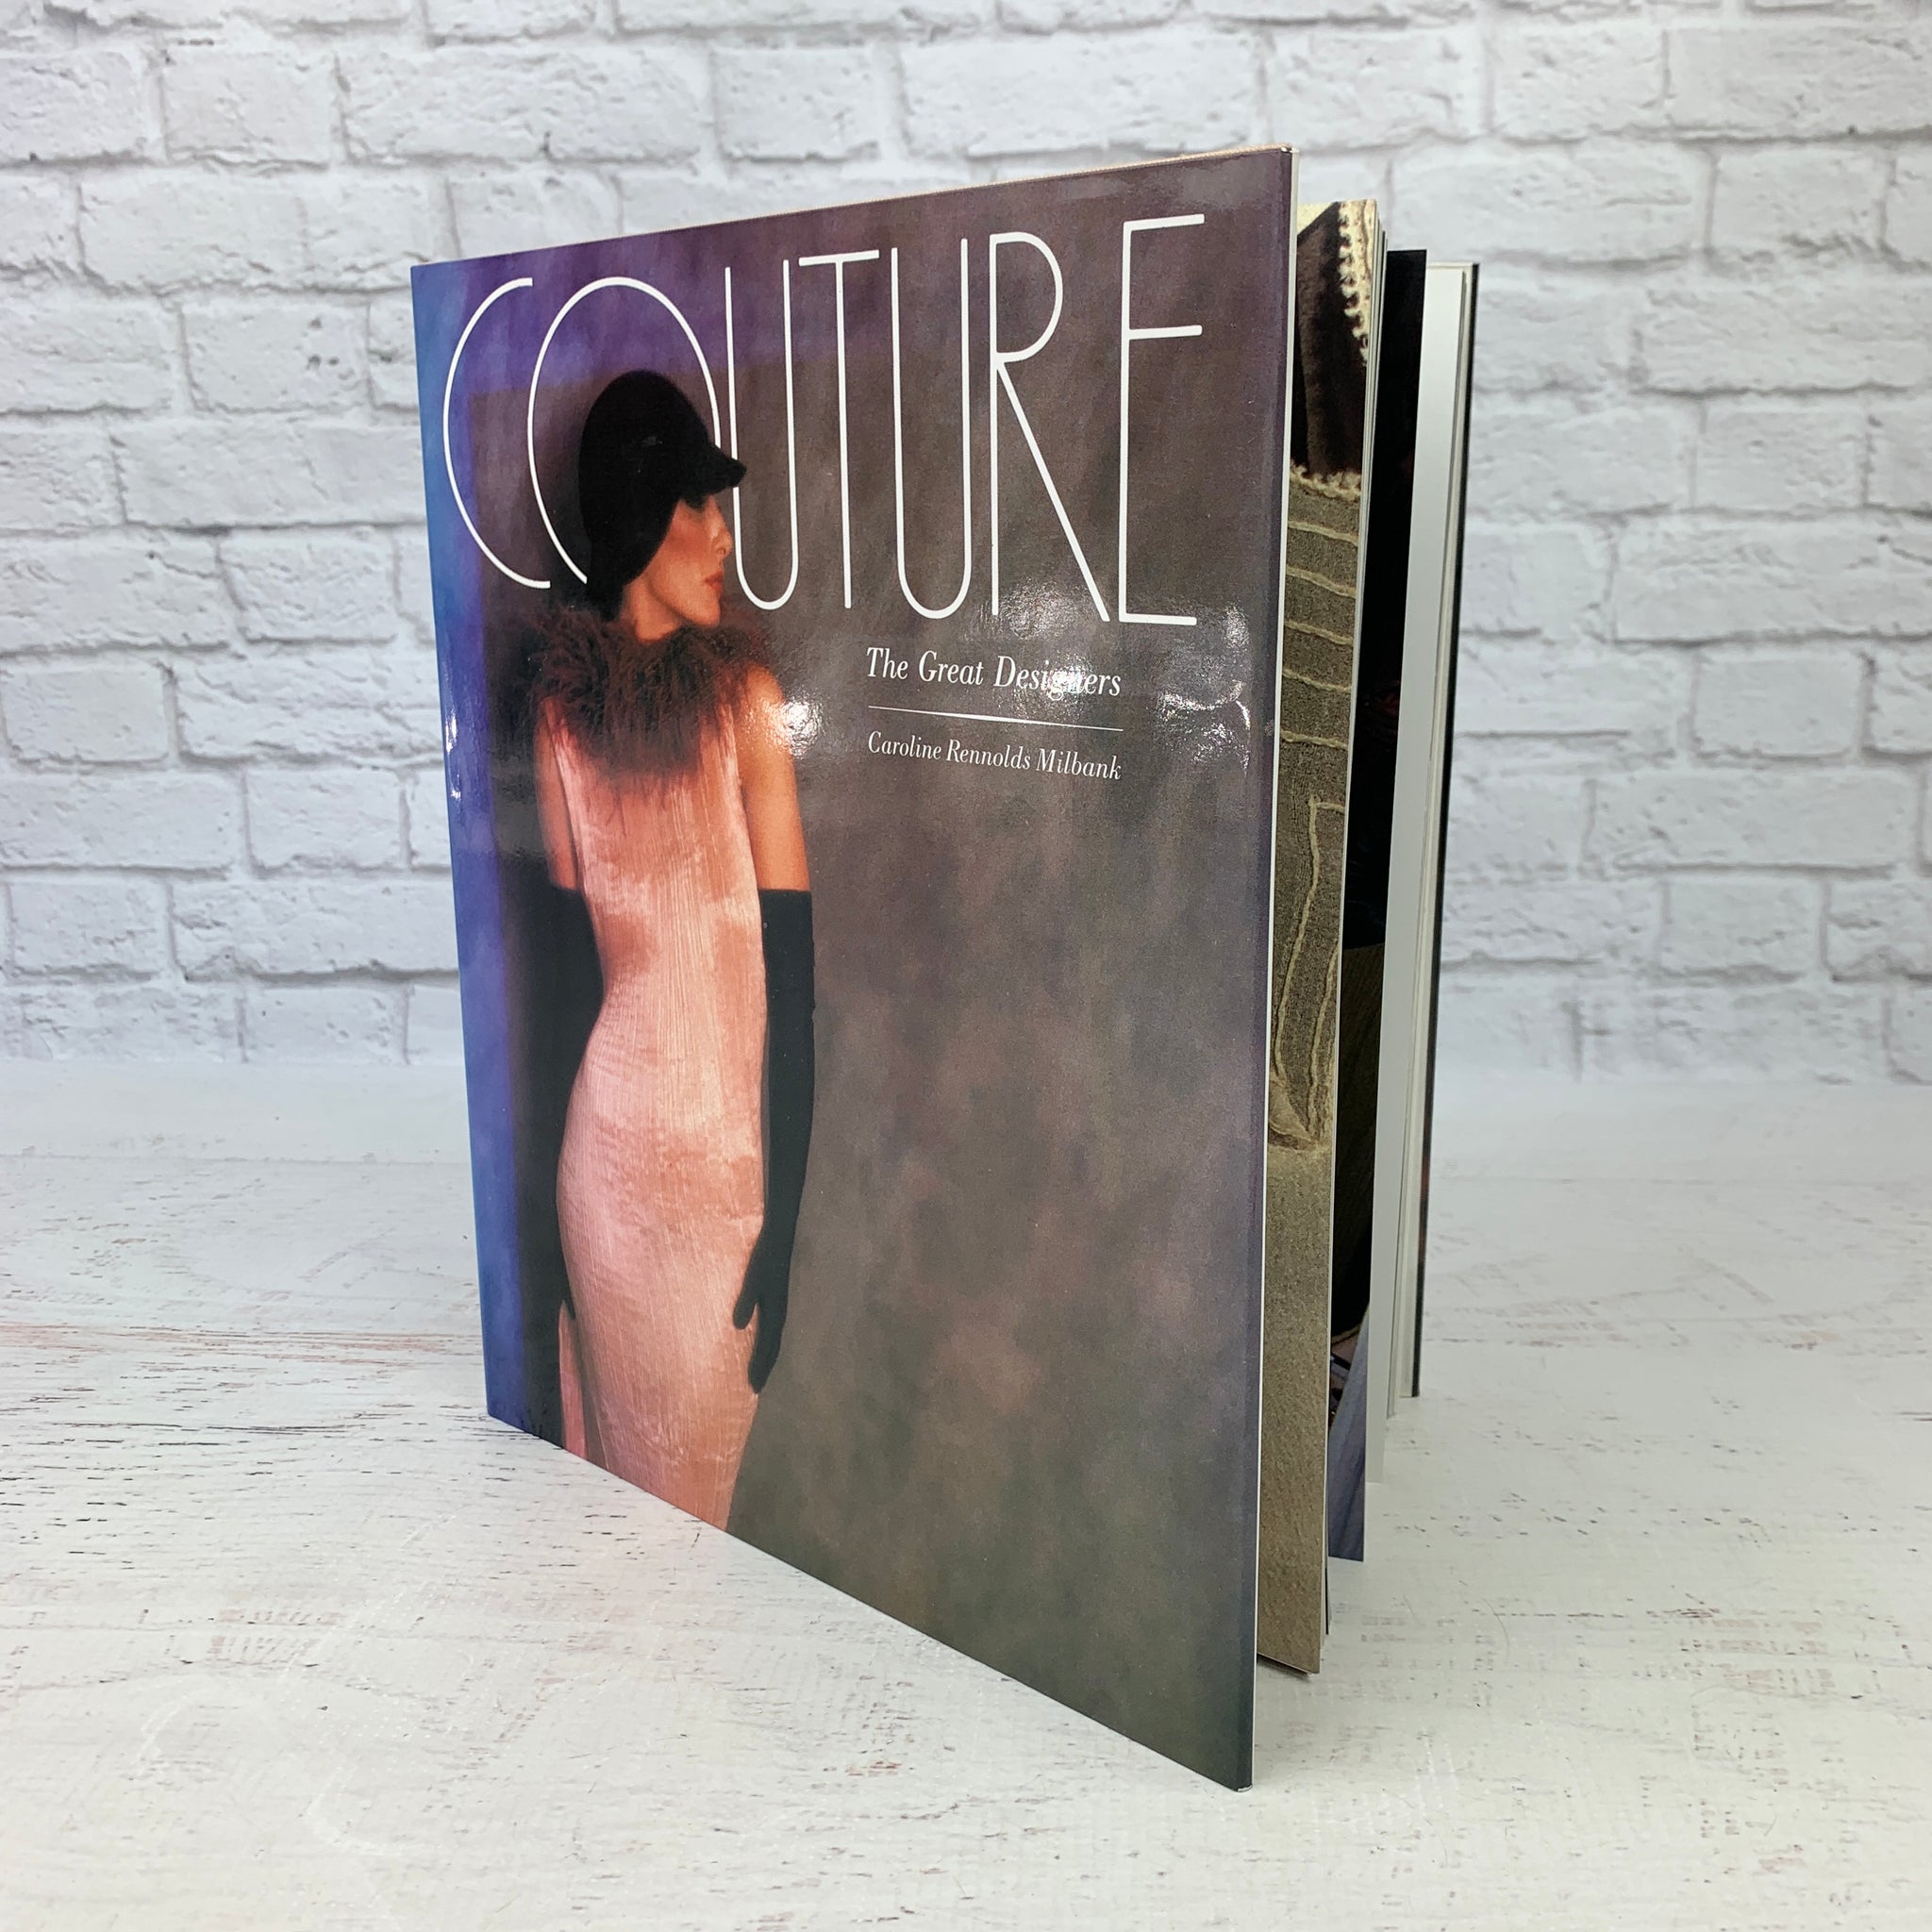 Couture, the Great Designers Hardcover Coffee Table Book